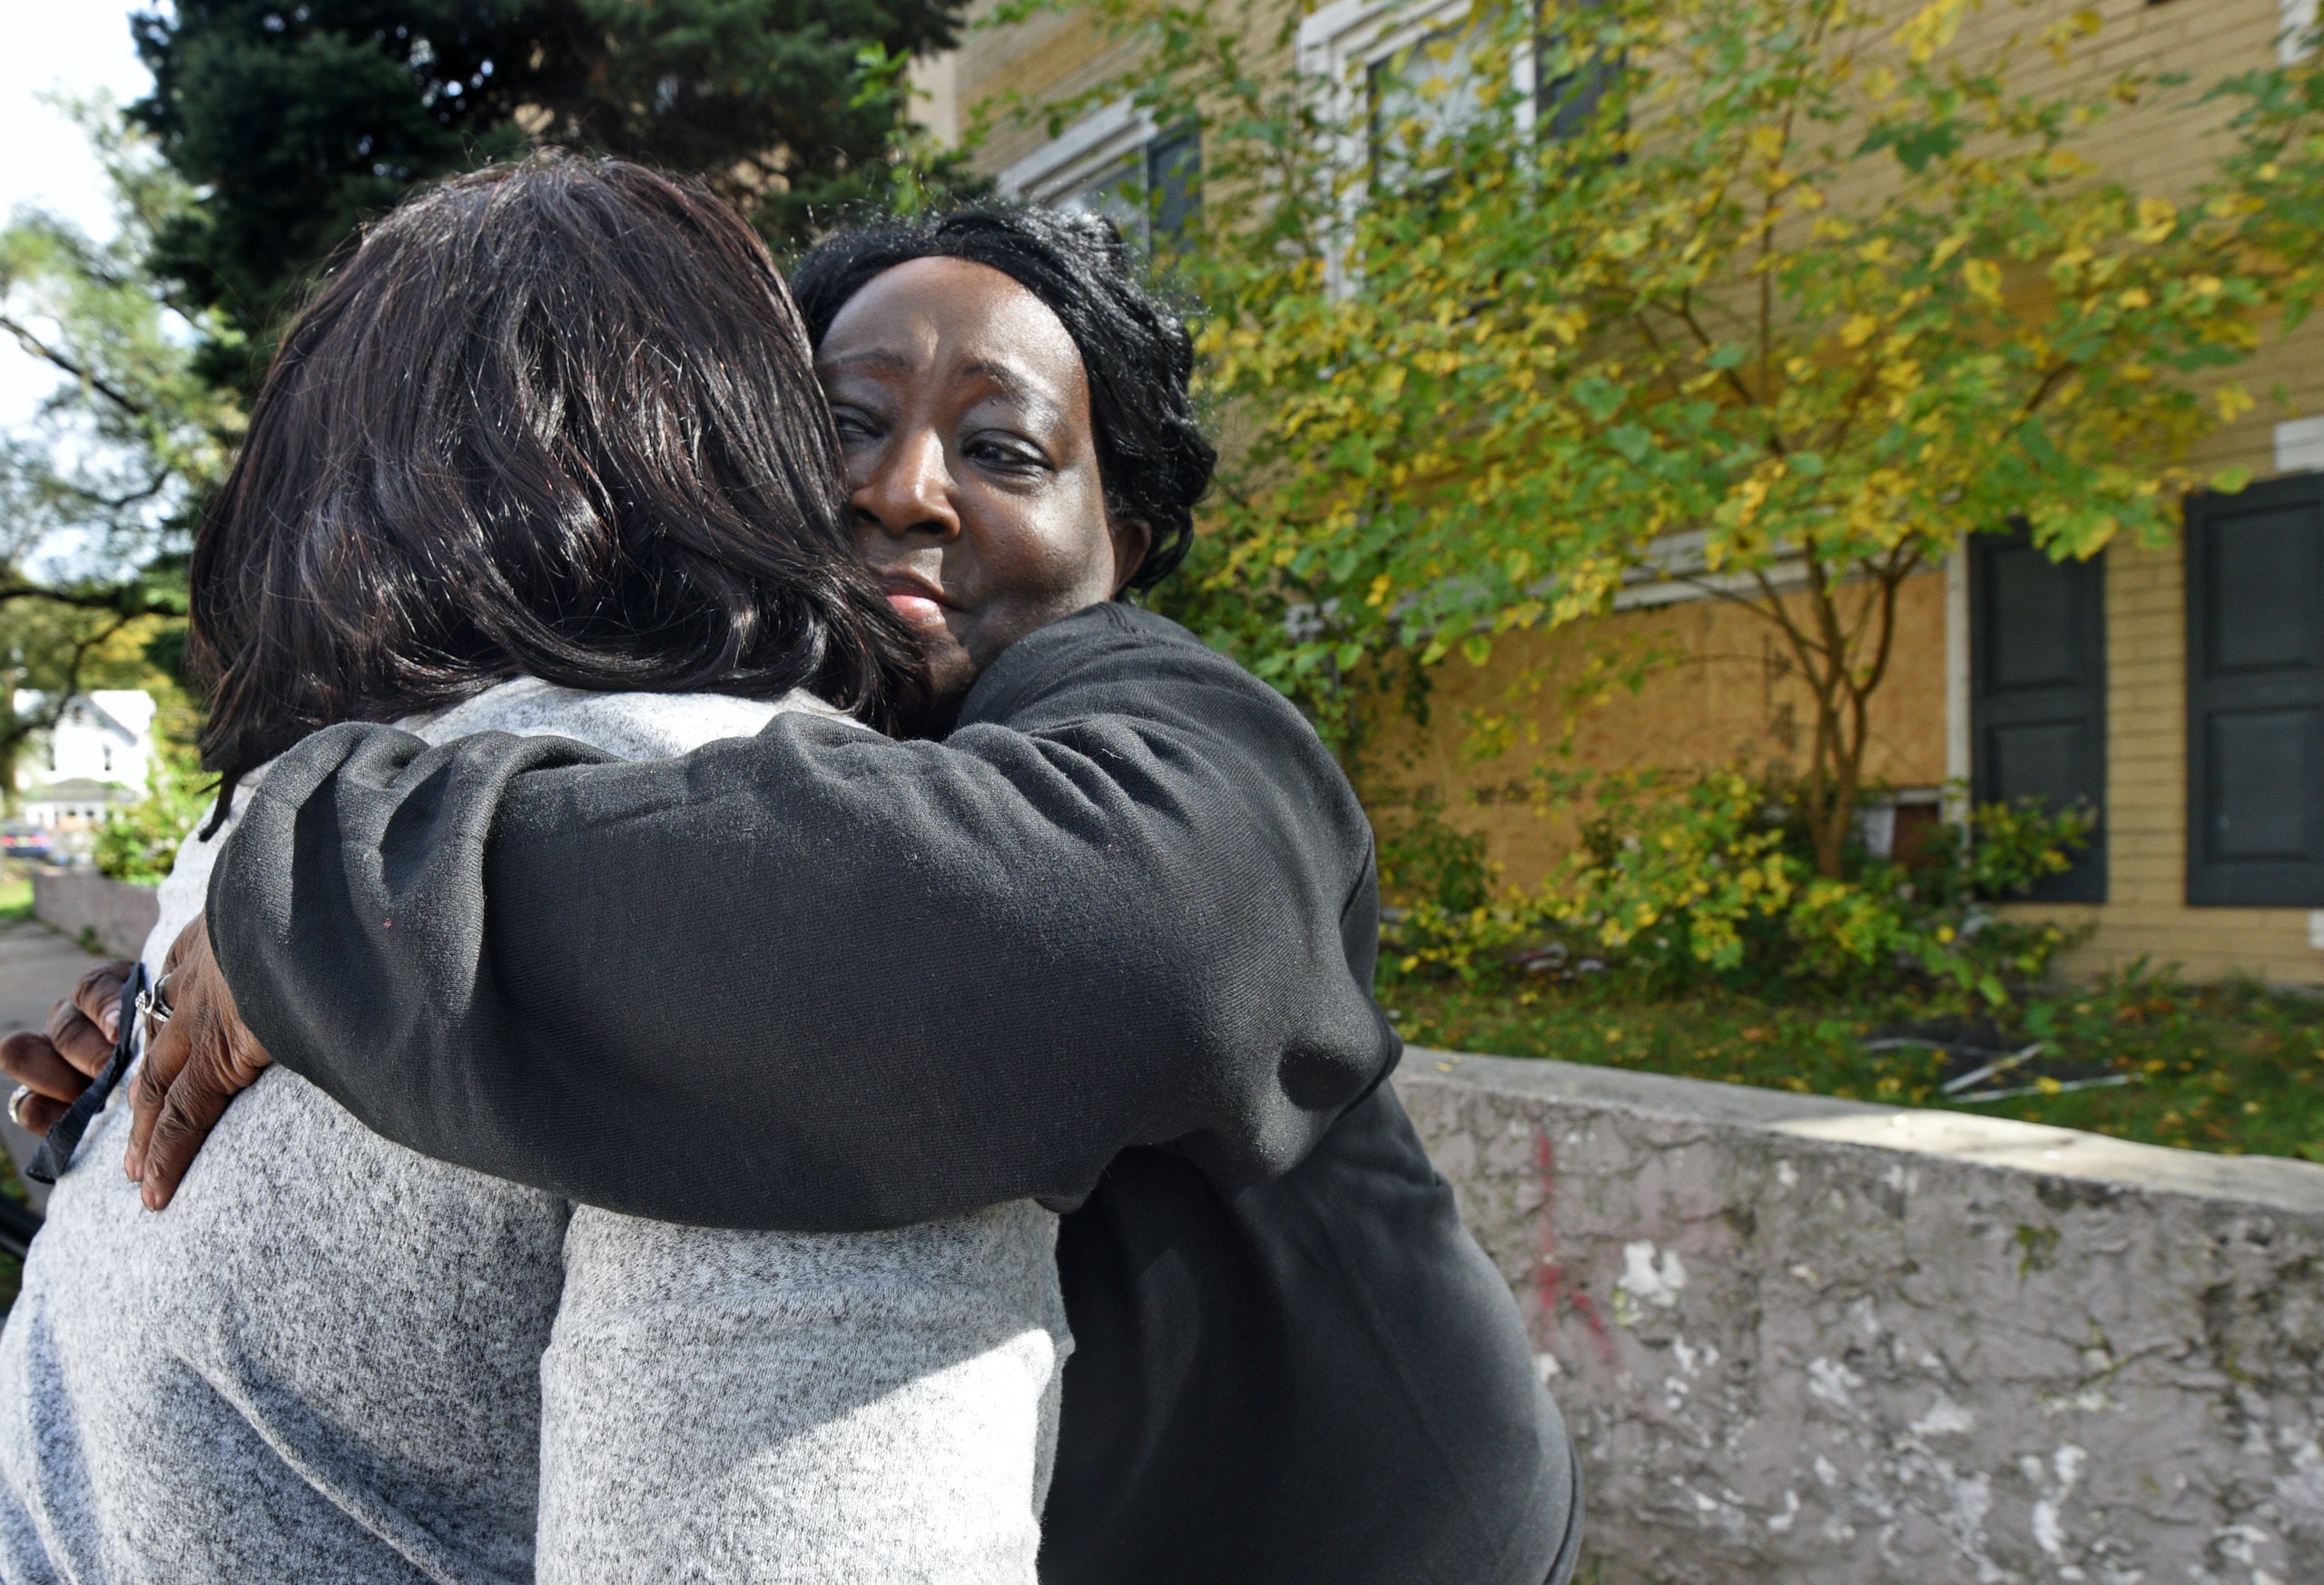 At the Cra-West Apartments in Camden on Oct. 27, tenant Pamela Mumford gets a hug after removing belongings from the apartment she shared with her daughter before the fire on Sunday